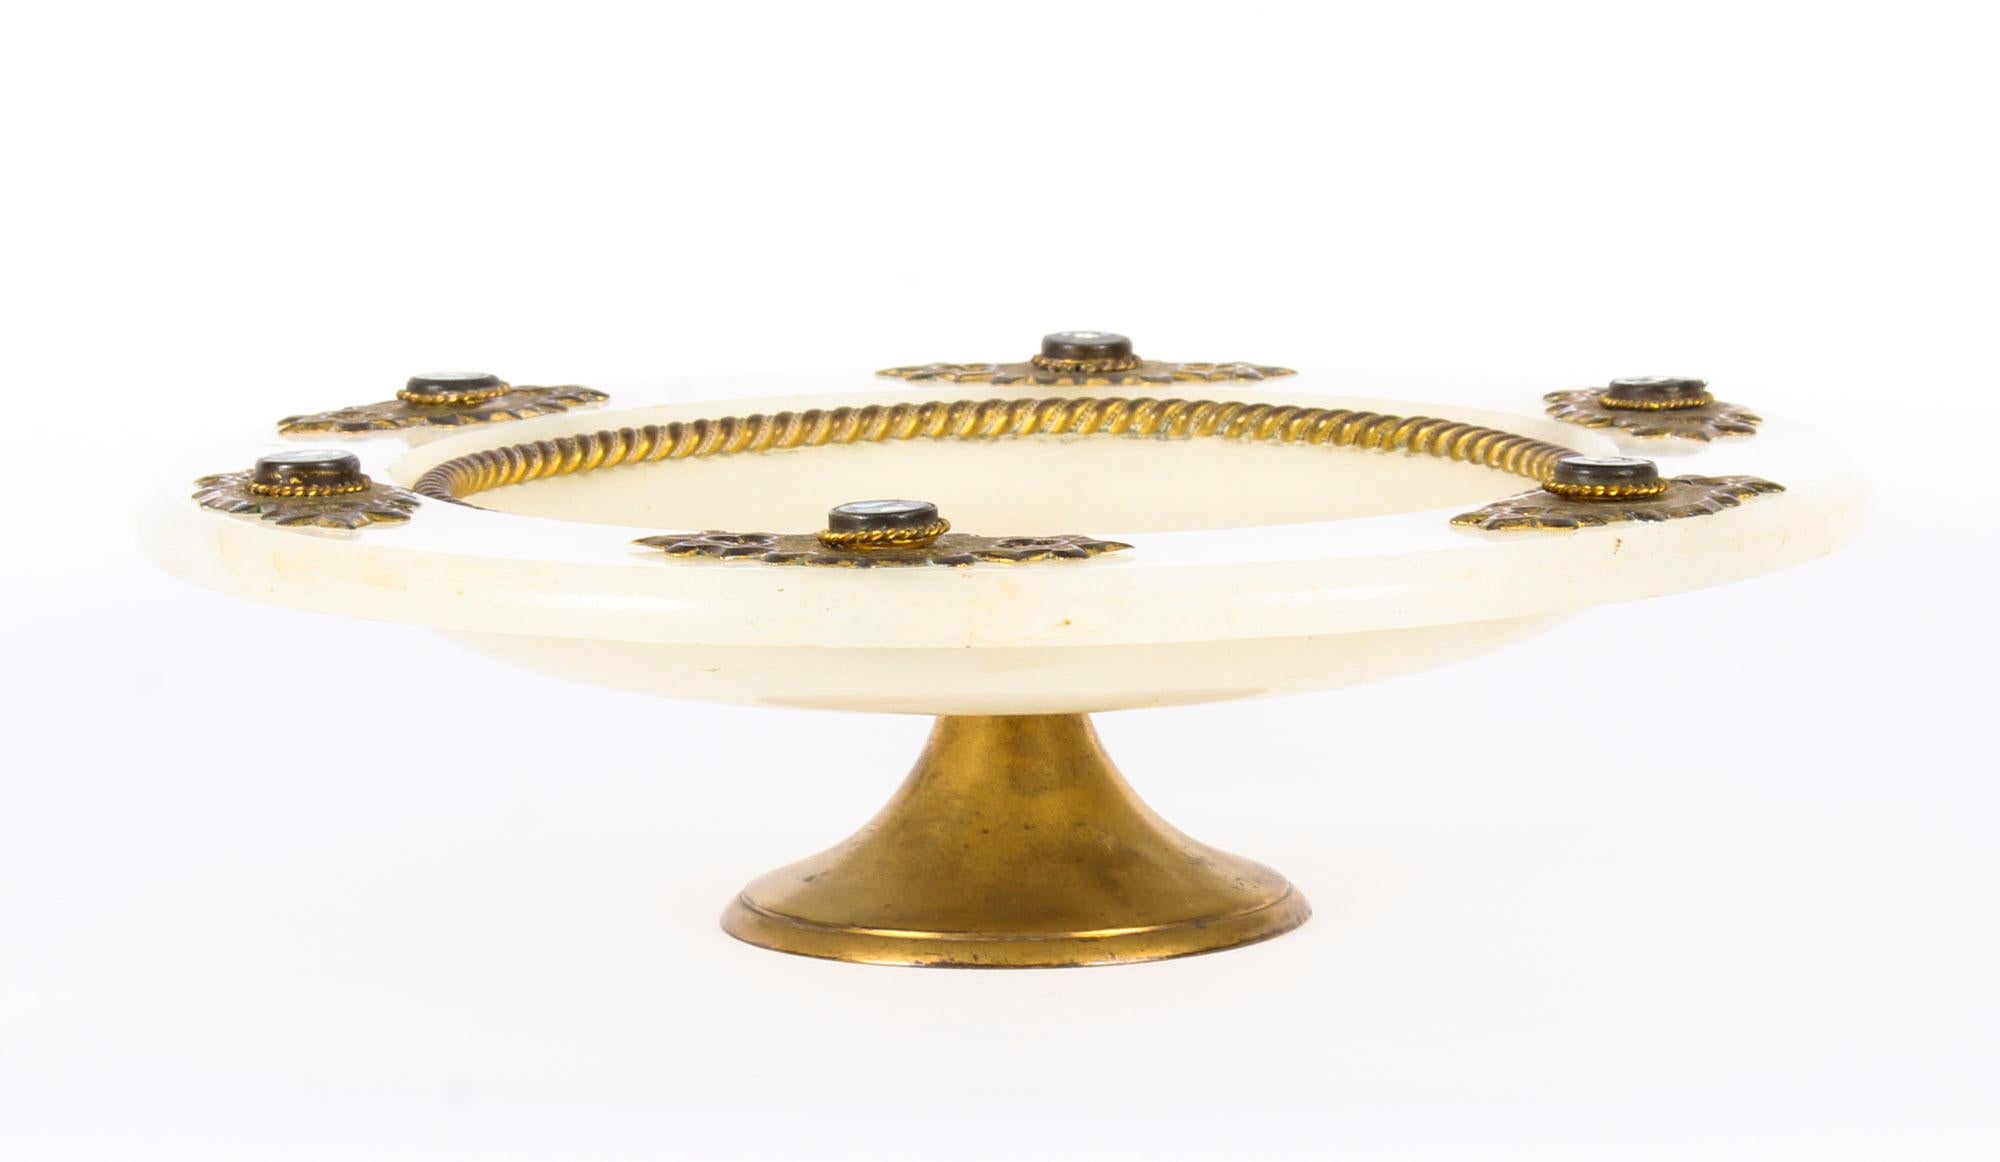 This is a superb quality antique Italian Pietra Dura mounted, gilt brass and alabaster table-centre comport dish, dating from the late 19th century.

With striking pierced Neo-Gothic chased brass mounts this splendid alabaster dish is set with six